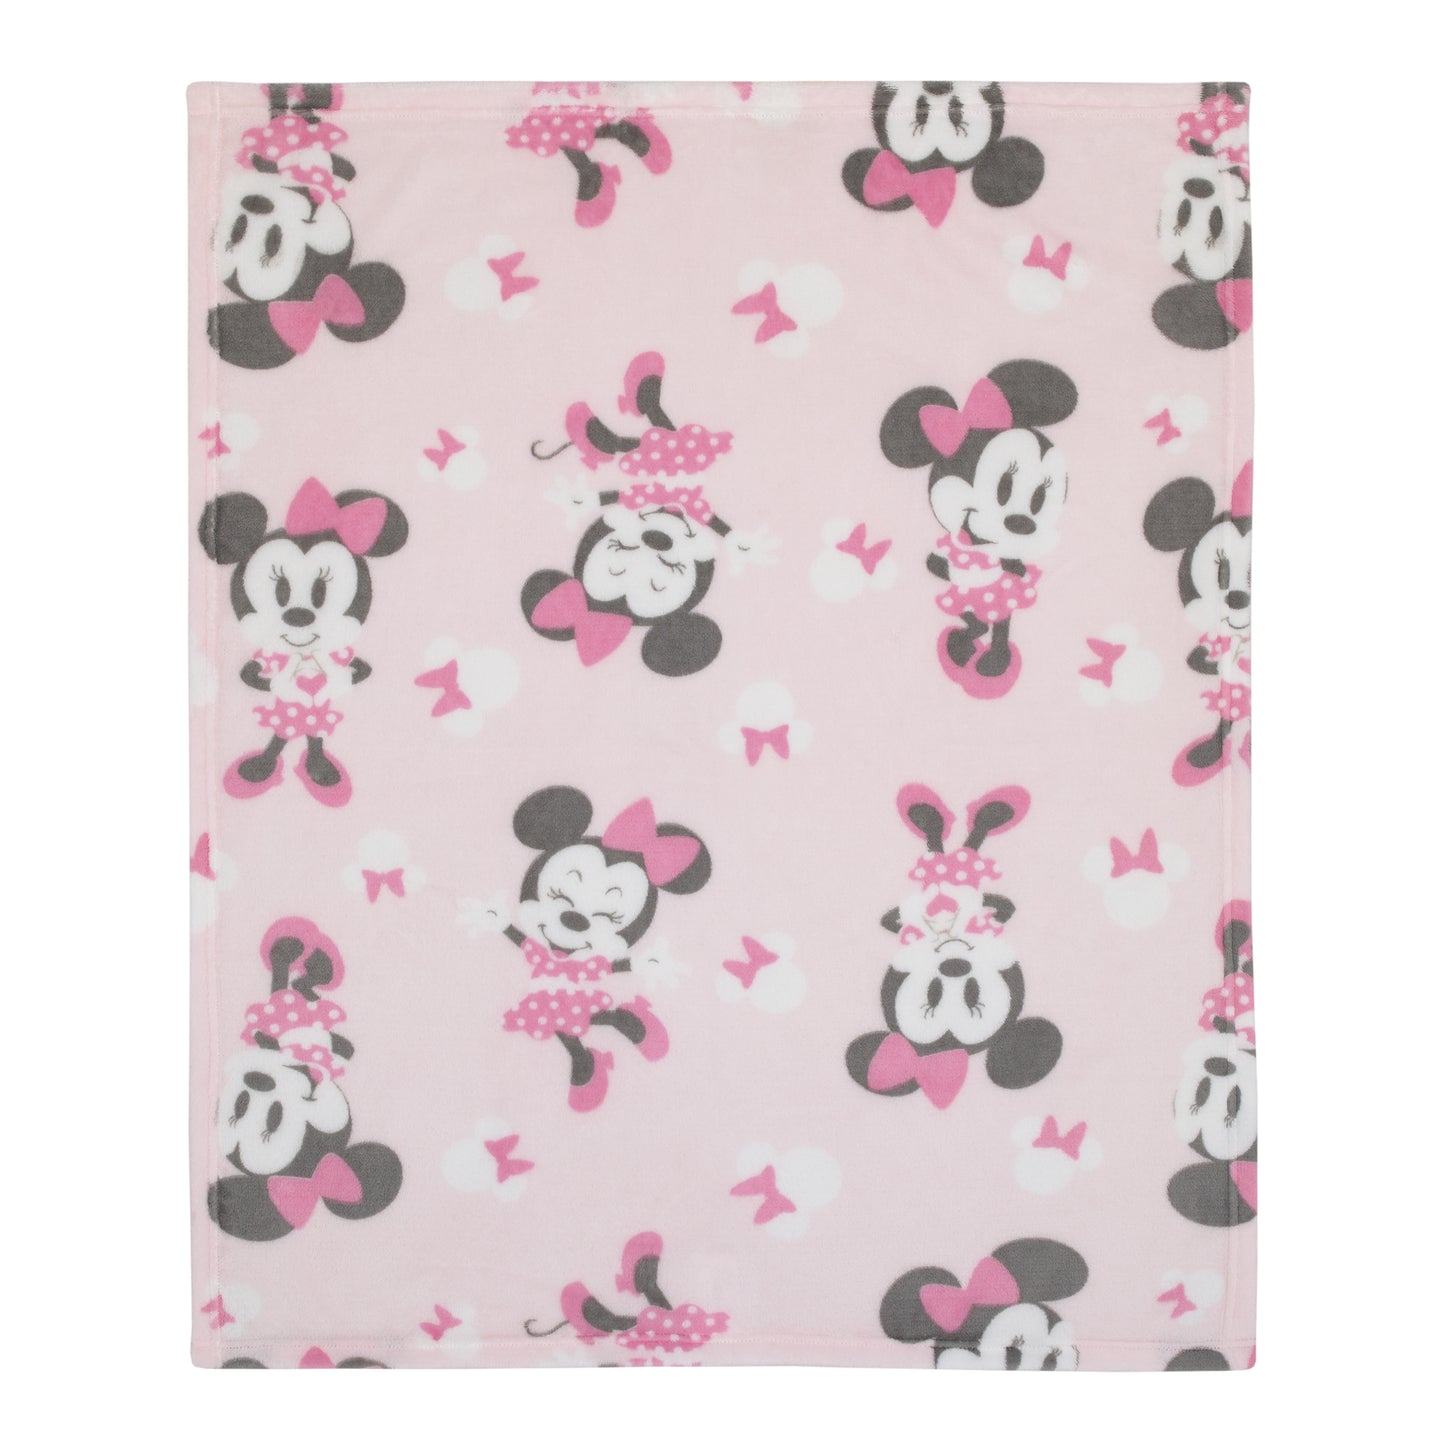 Disney Minnie Mouse Pastel Pink, White and Black Bows and Icons Super Soft Baby Blanket